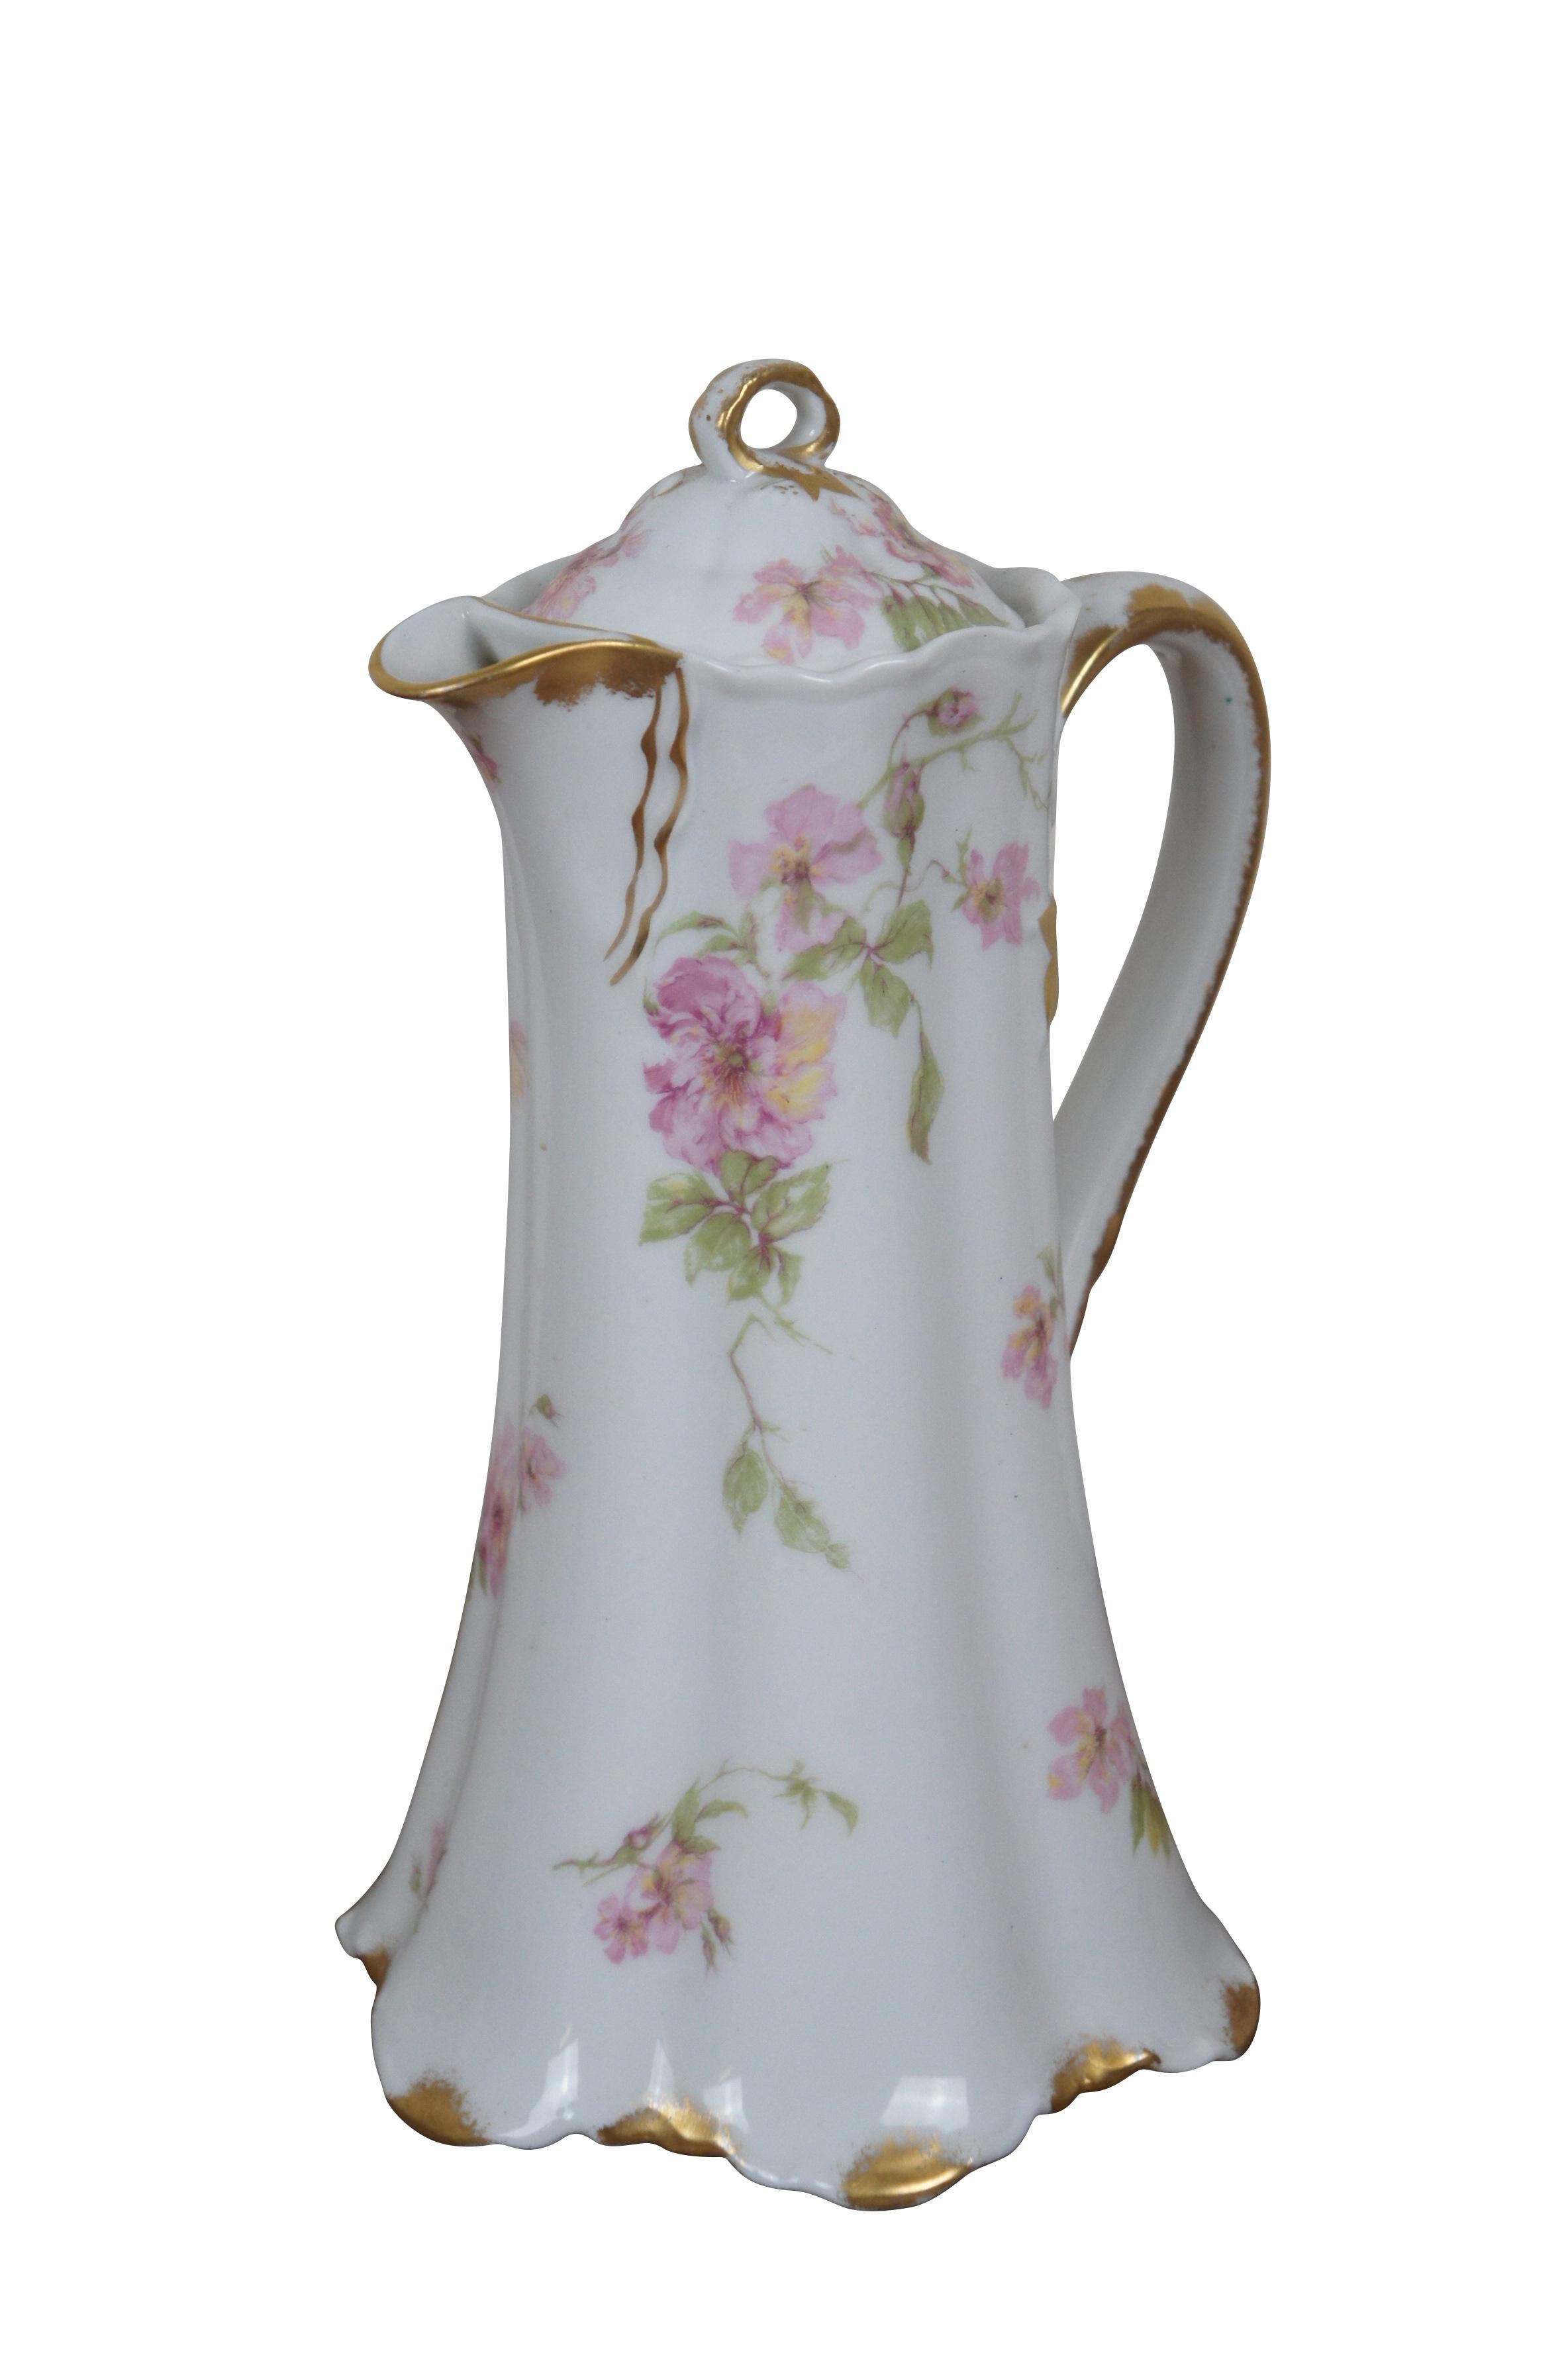 Early 20th century large Haviland & Co Limoges porcelain chocolate / tea pot. Tall with scalloped base and upper edge, ribbon shaped handle, hand painted with springs of pink roses and gilded details.

